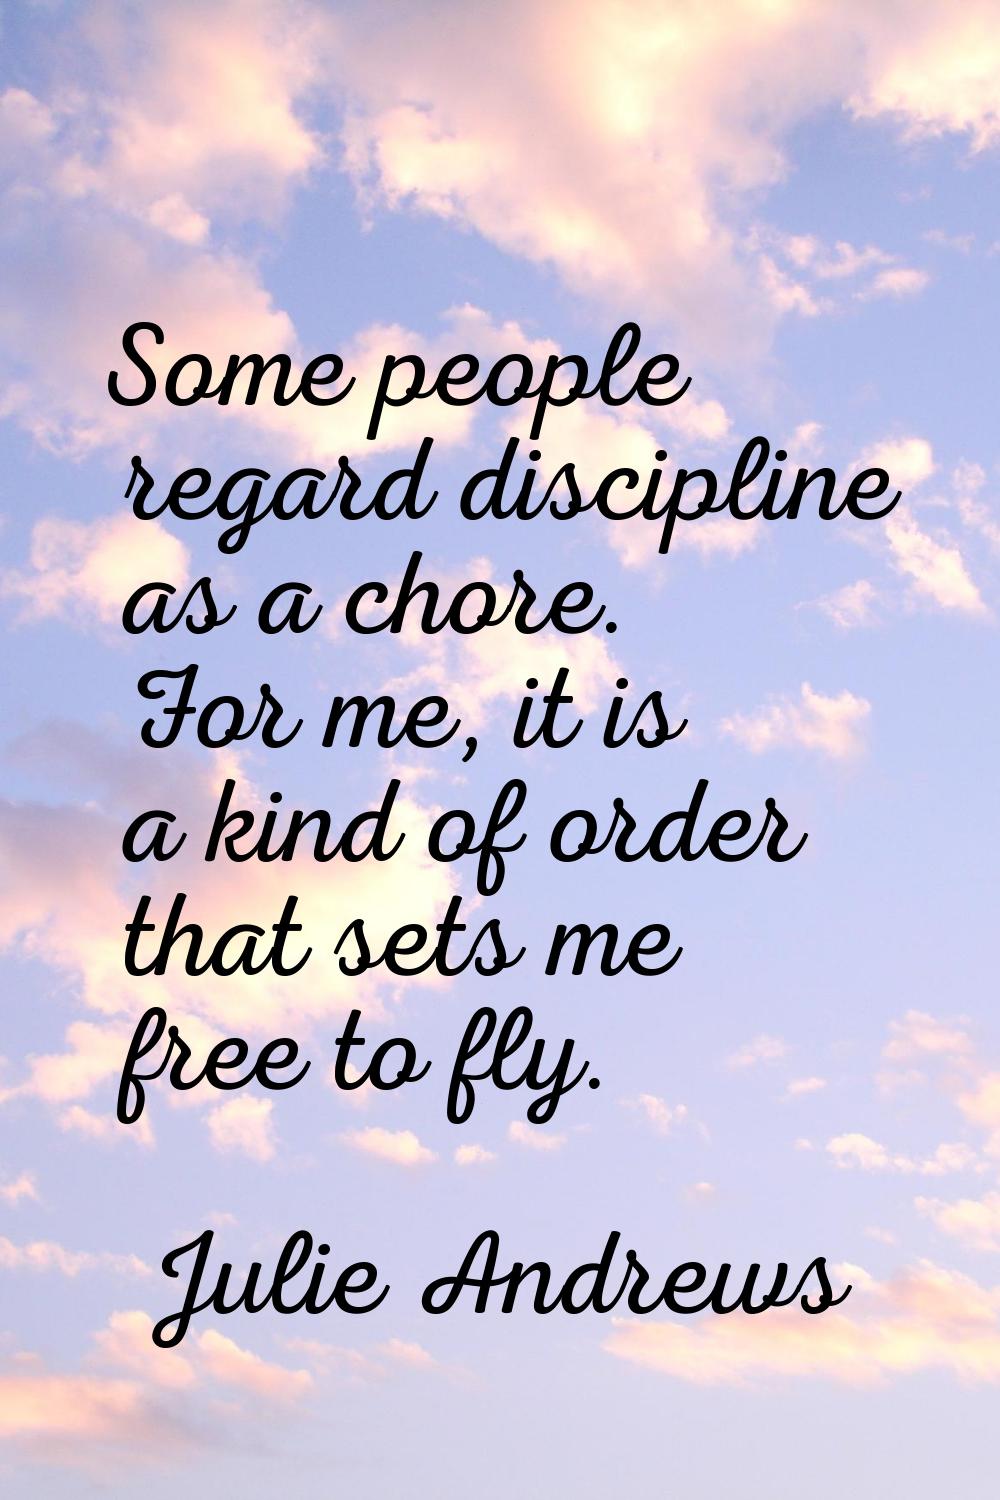 Some people regard discipline as a chore. For me, it is a kind of order that sets me free to fly.